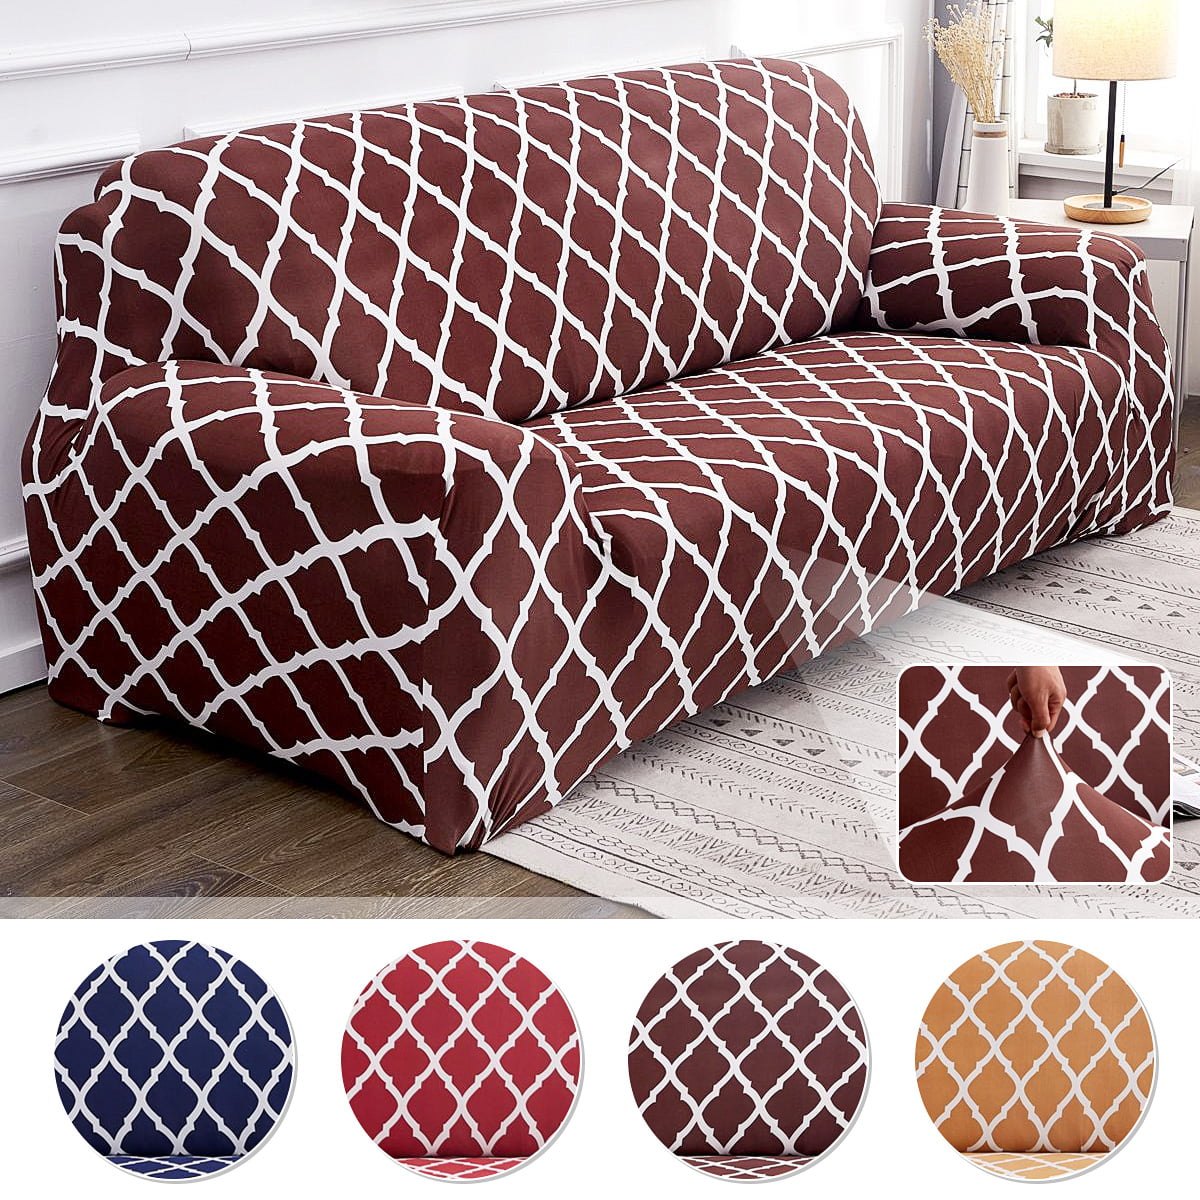 Details about   1/2/3/4 Seater Elastic Sofa Covers All-inclusive Couch Cover Slipcover Protector 